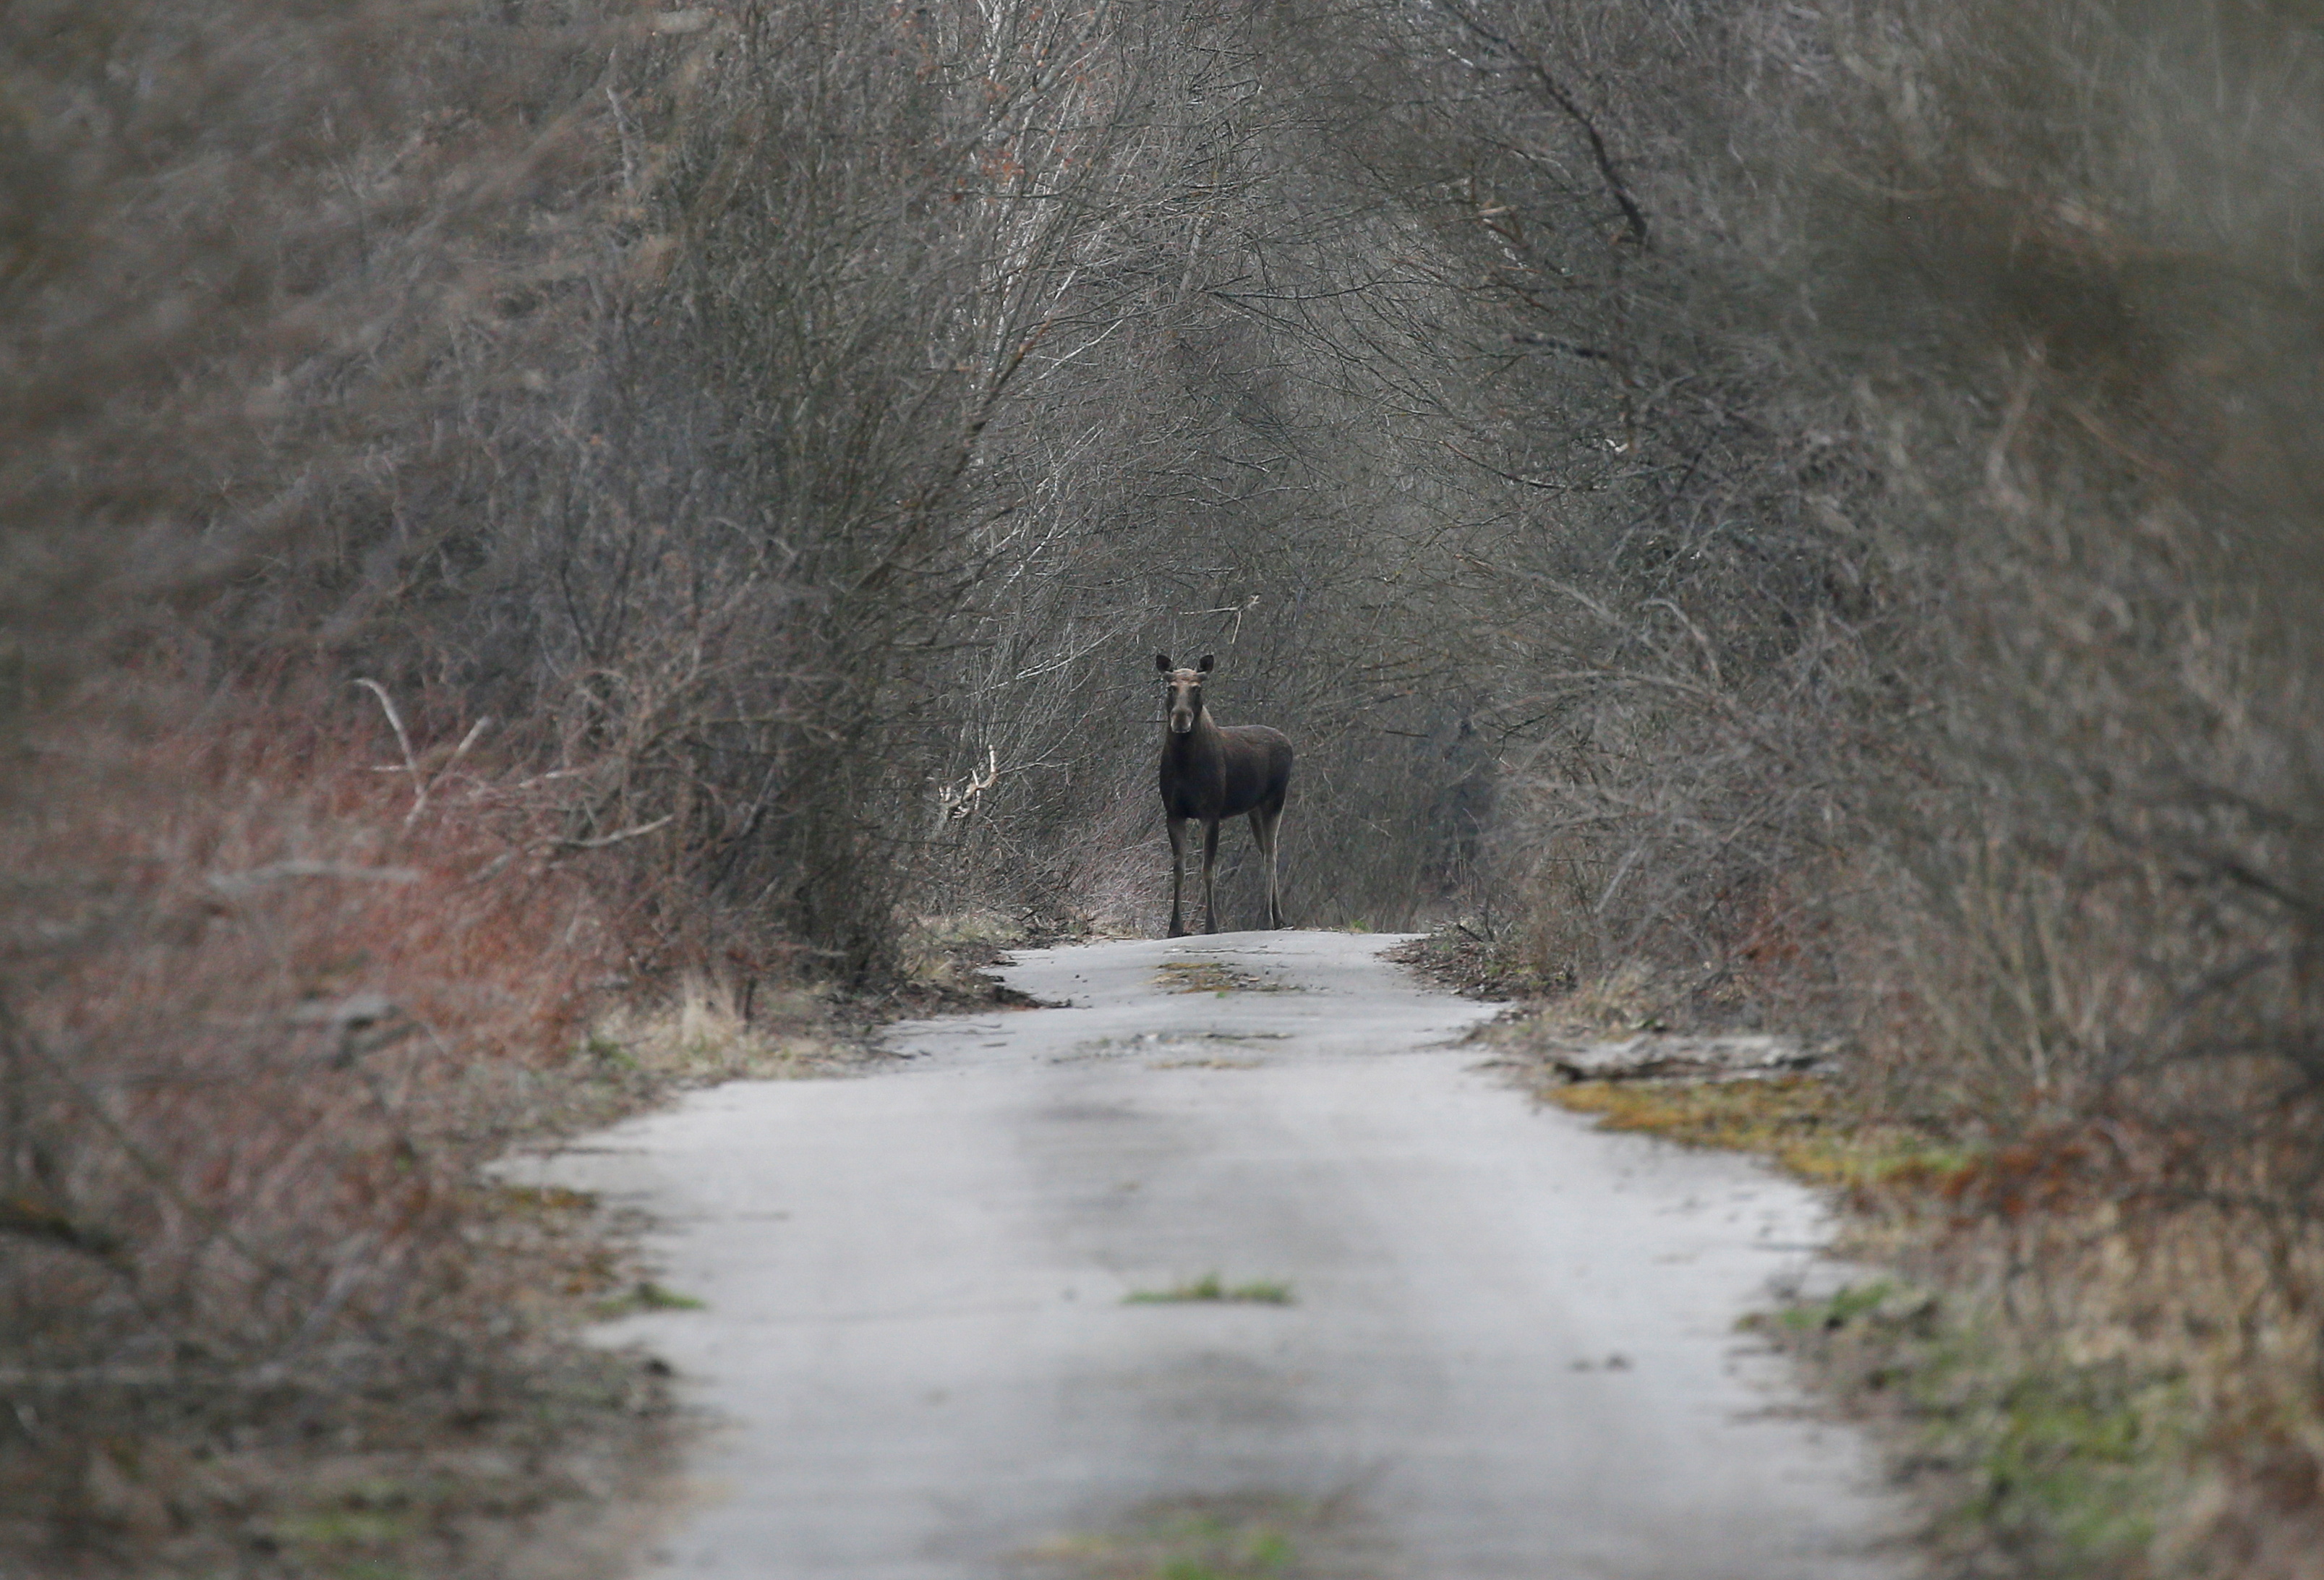 An elk is seen on a road in the Chernobyl zone